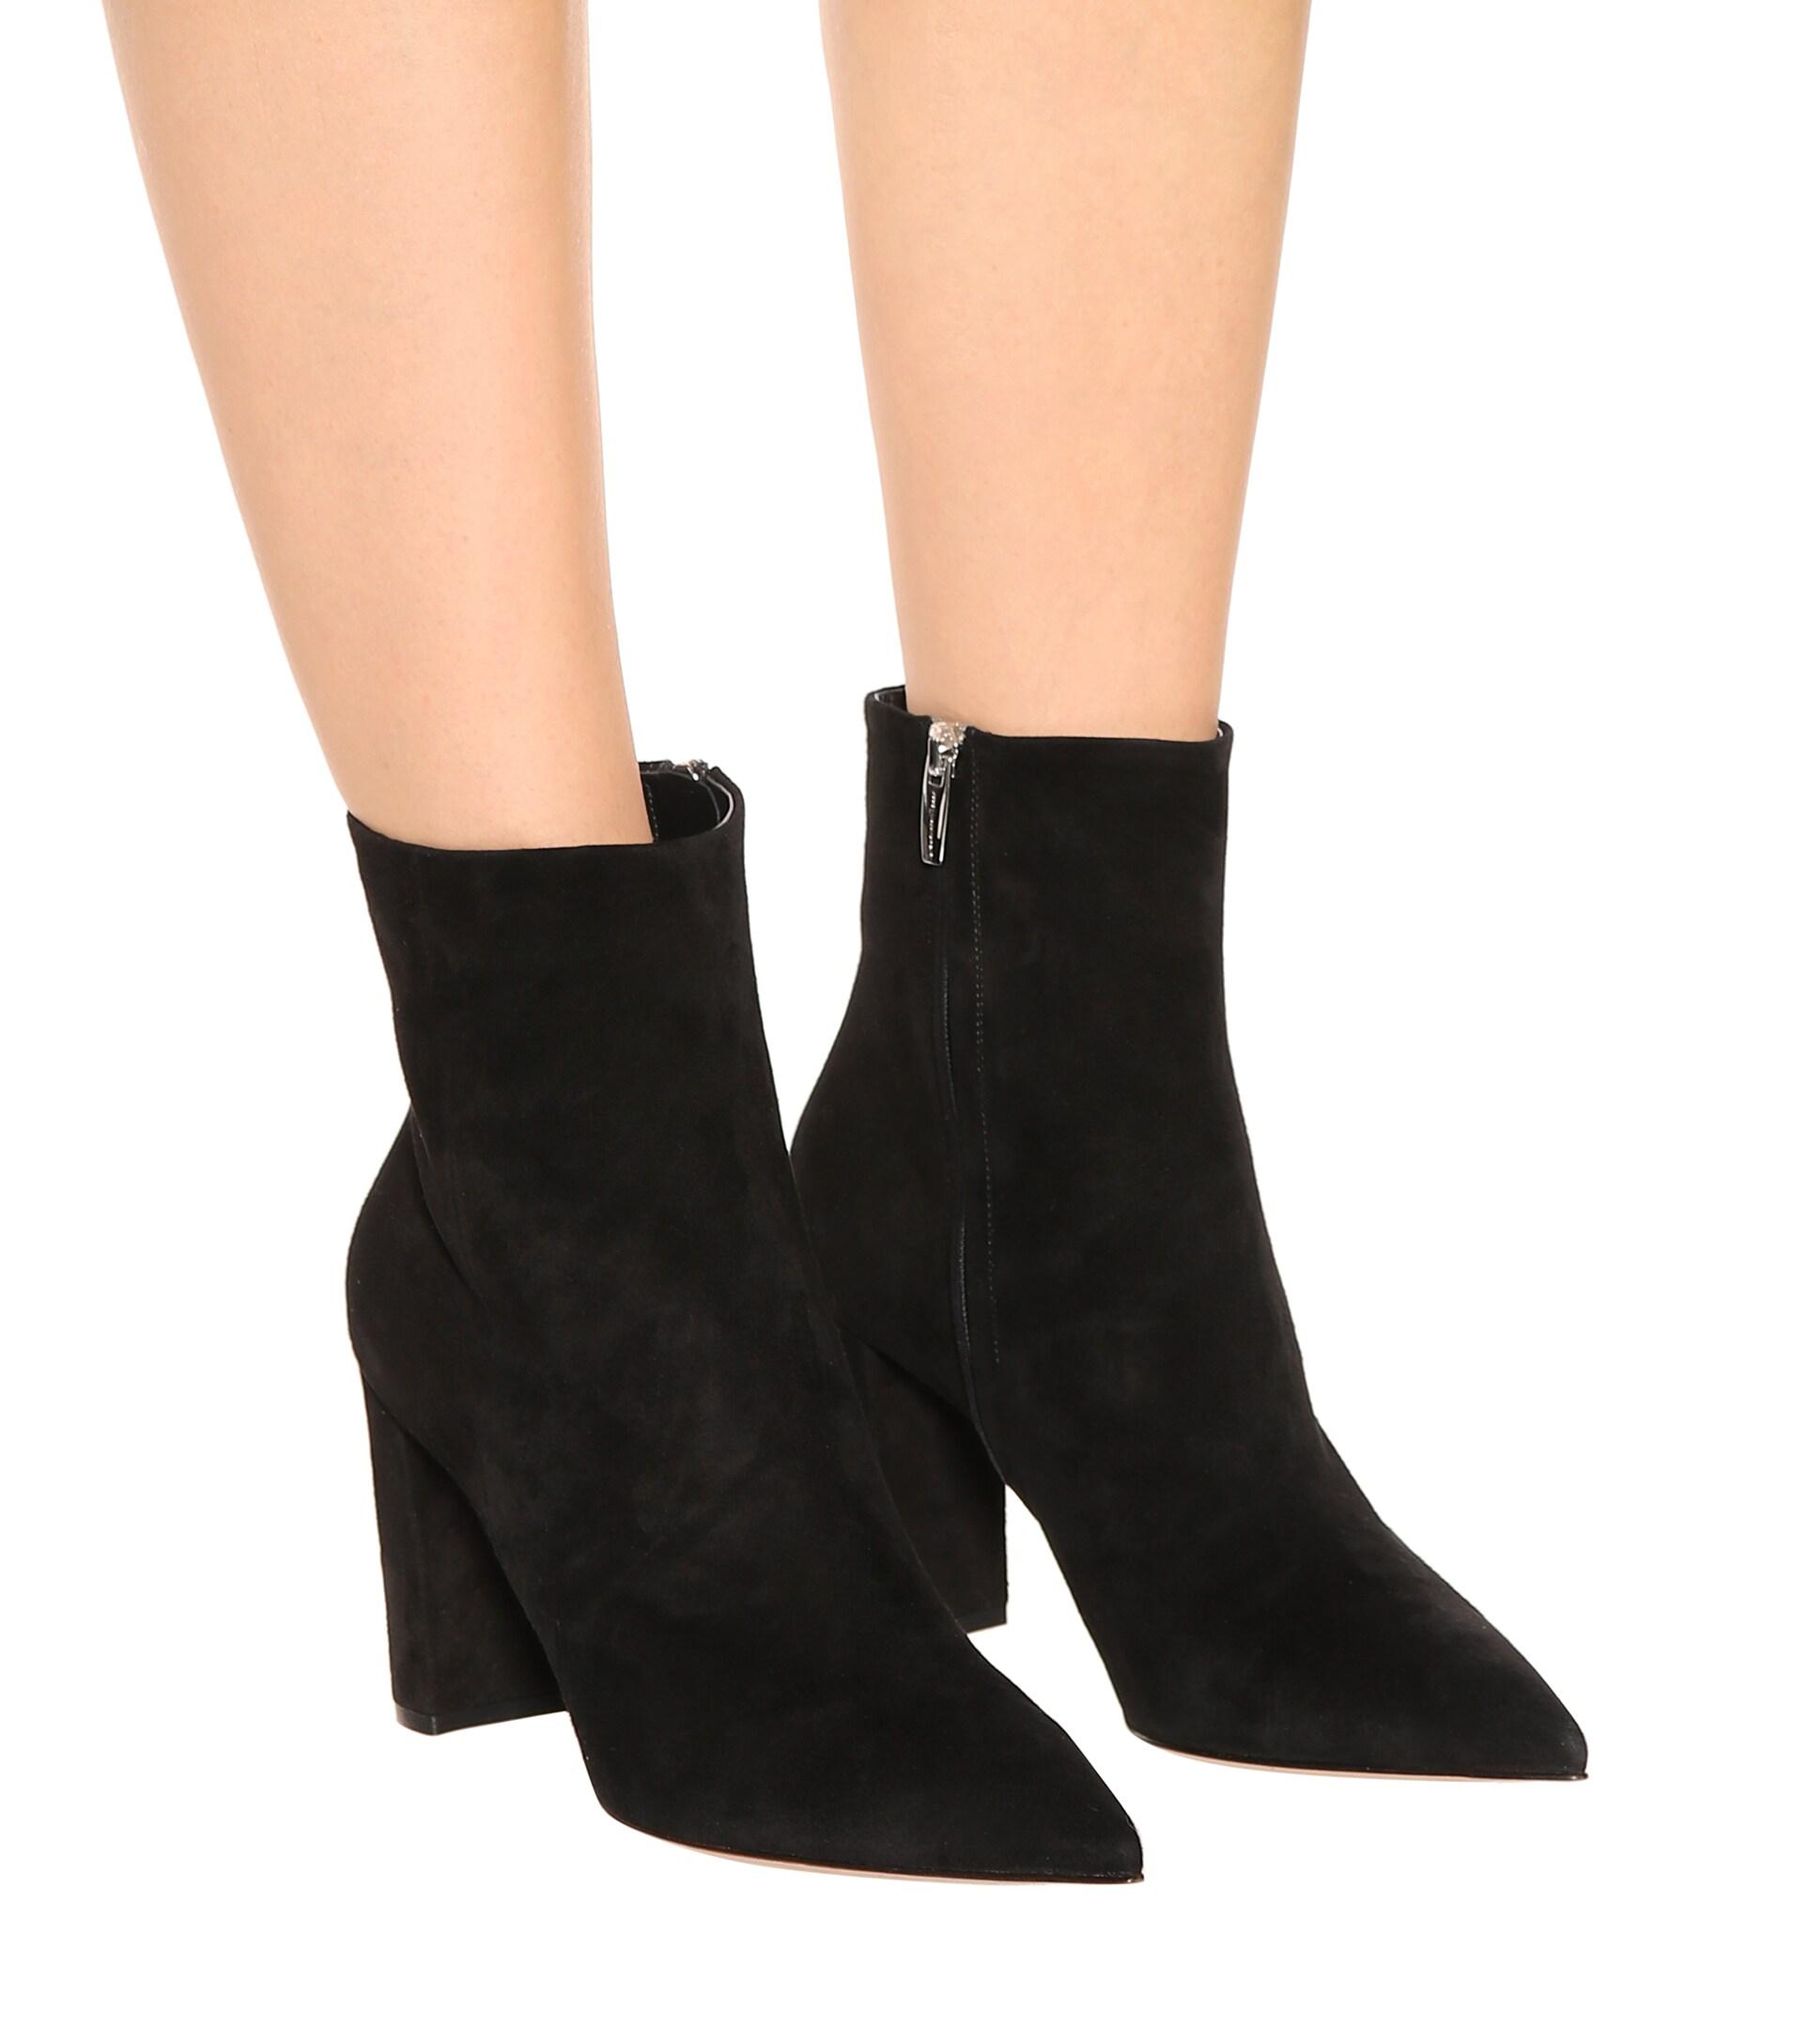 Gianvito Rossi Piper 85 Suede Ankle Boots in Black | Lyst